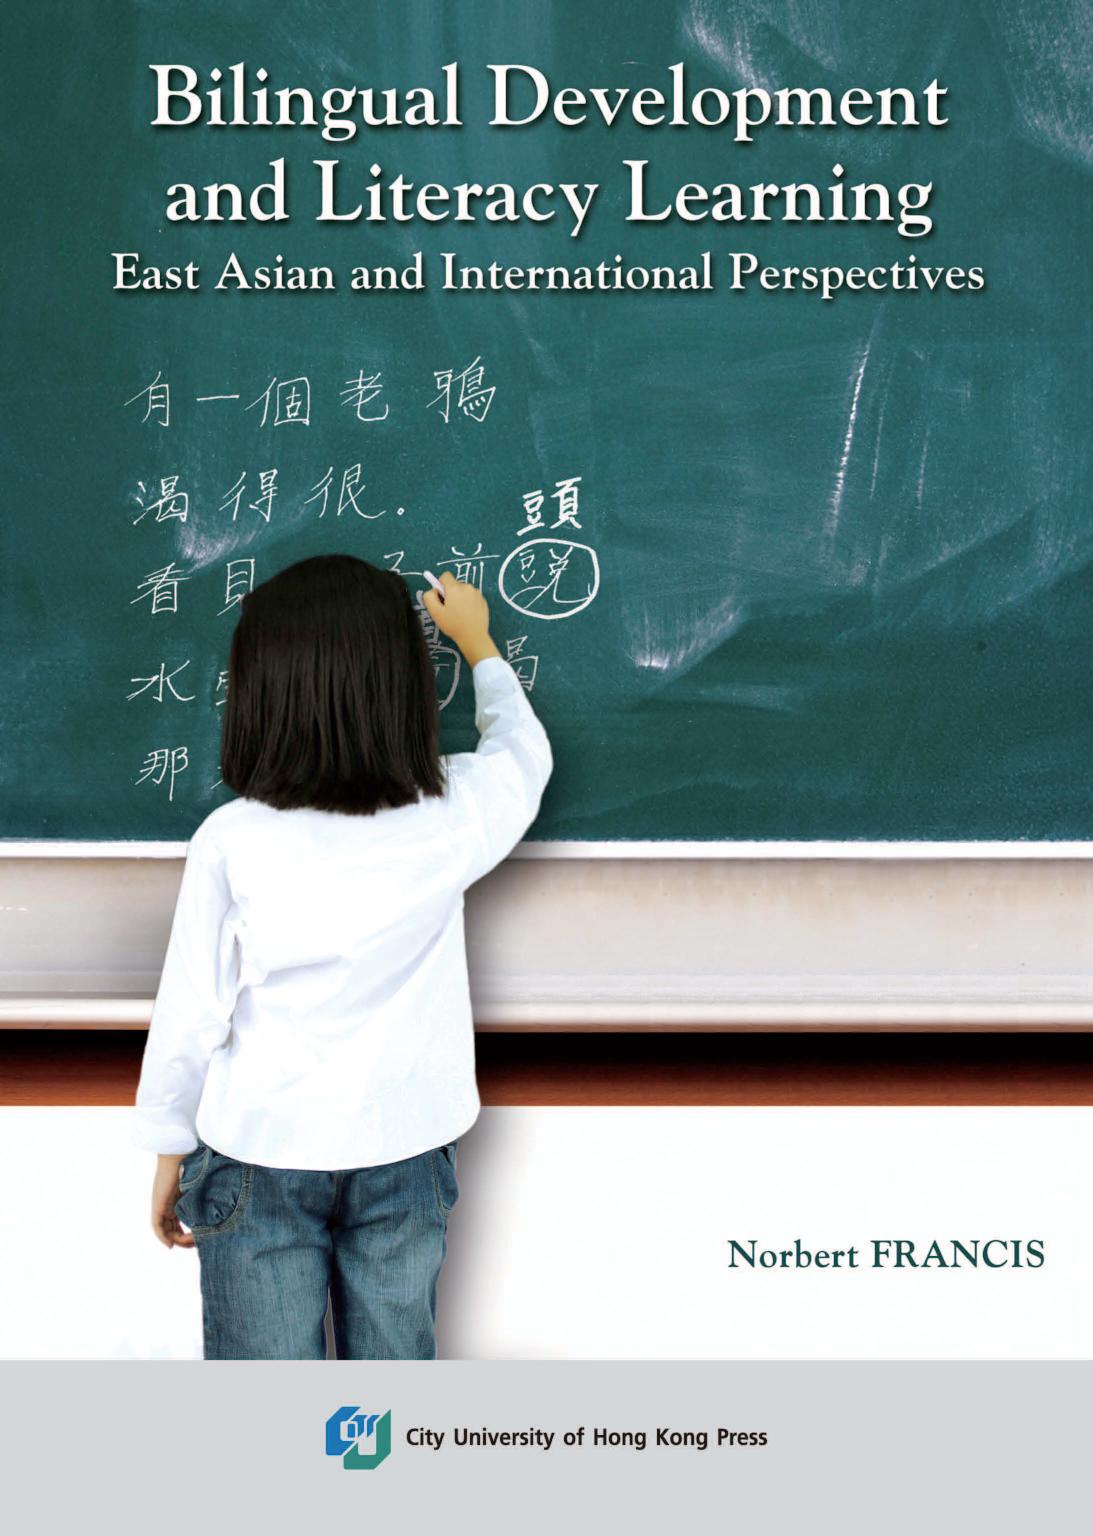 Bilingual Development and Literacy Learning-East Asian and International Perspectives by Norbert Francis